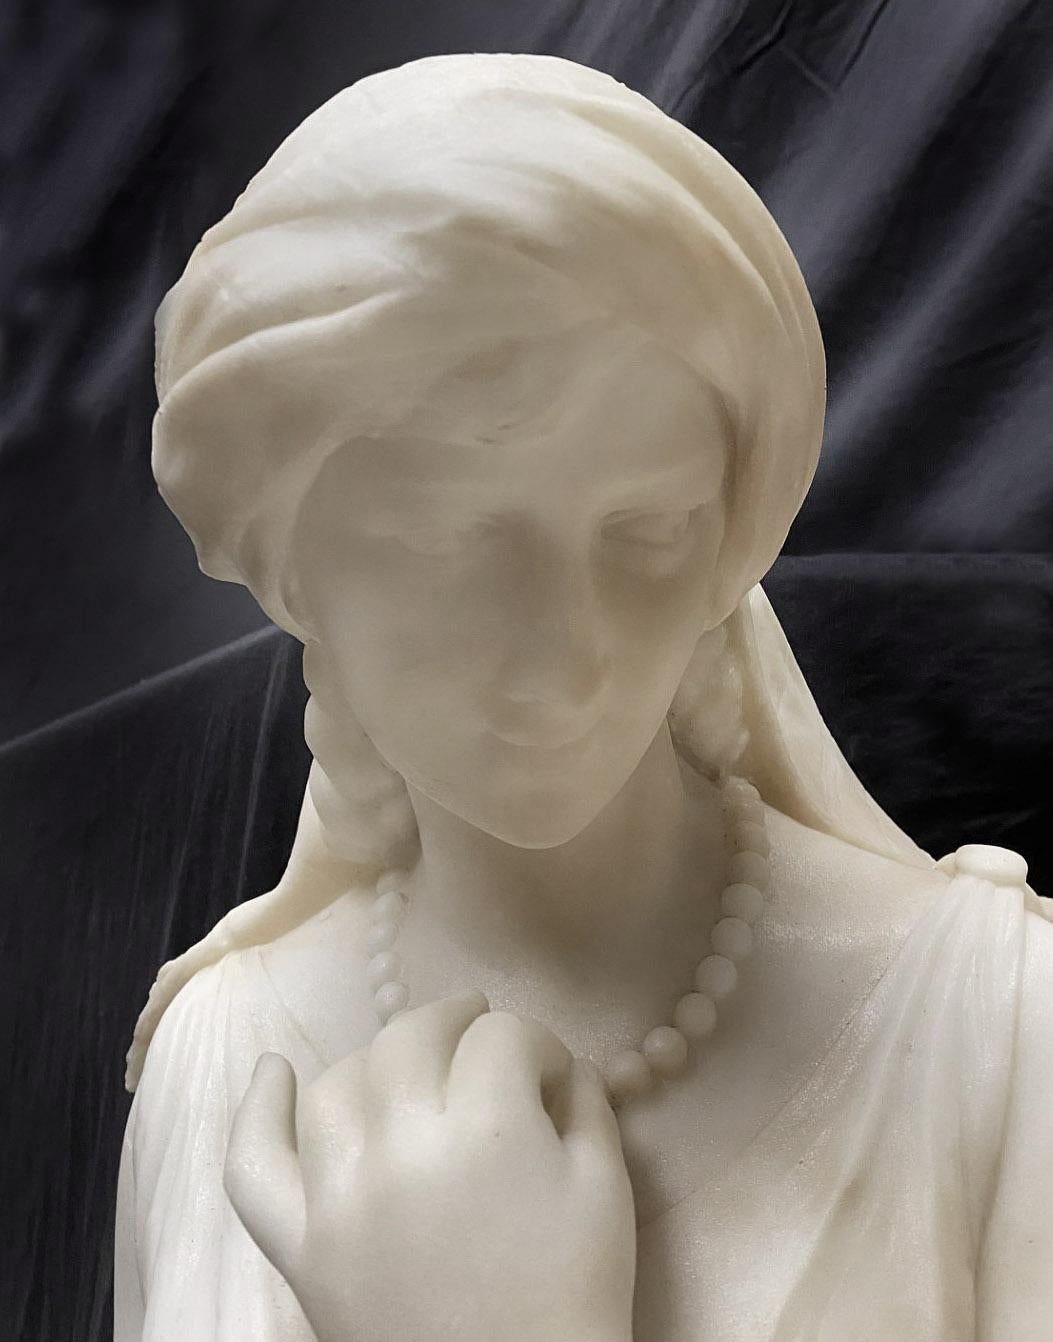 Hand-Carved 19th Century White Carrara Marble Entitled “Tendresse” by Émile-André Boisseau For Sale